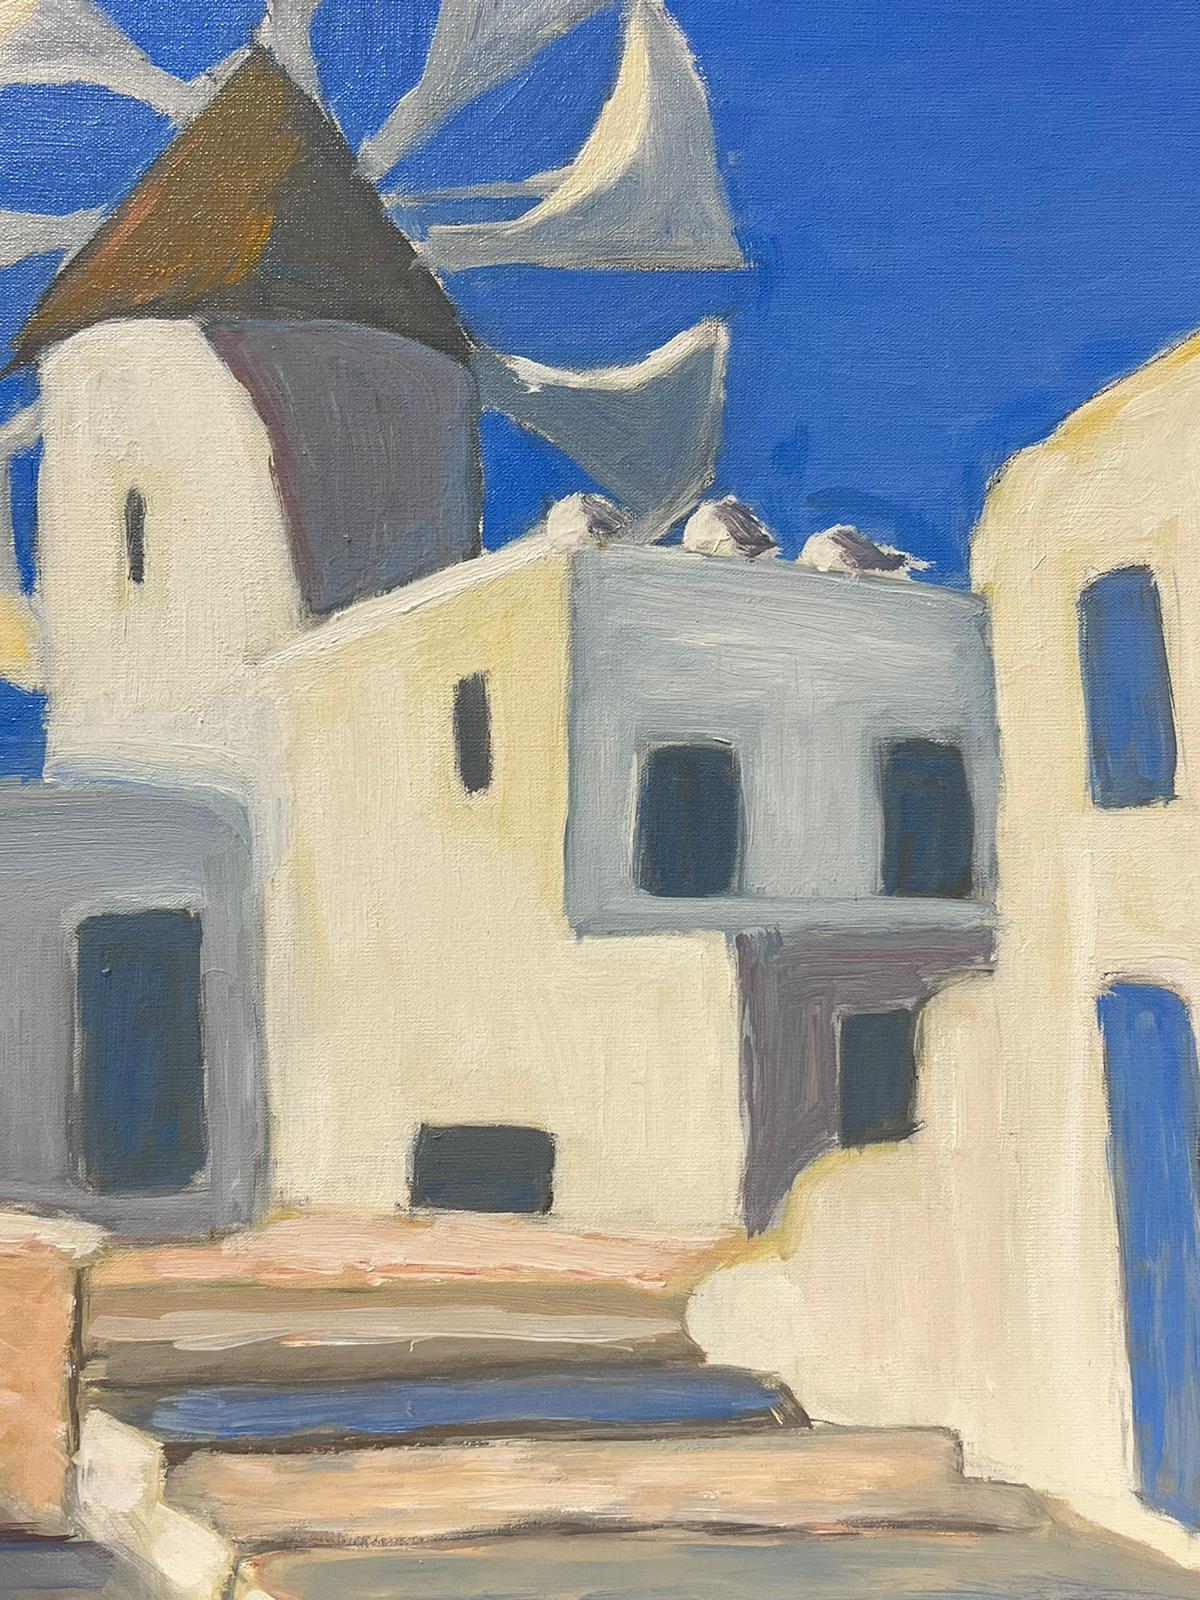 White Houses
by Georges Bordonave (French contemporary) 
oil painting on canvas, unframed
canvas: 16 x 16 inches
condition: very good
provenance: from a large private collection of this artists work, western Paris, France. 